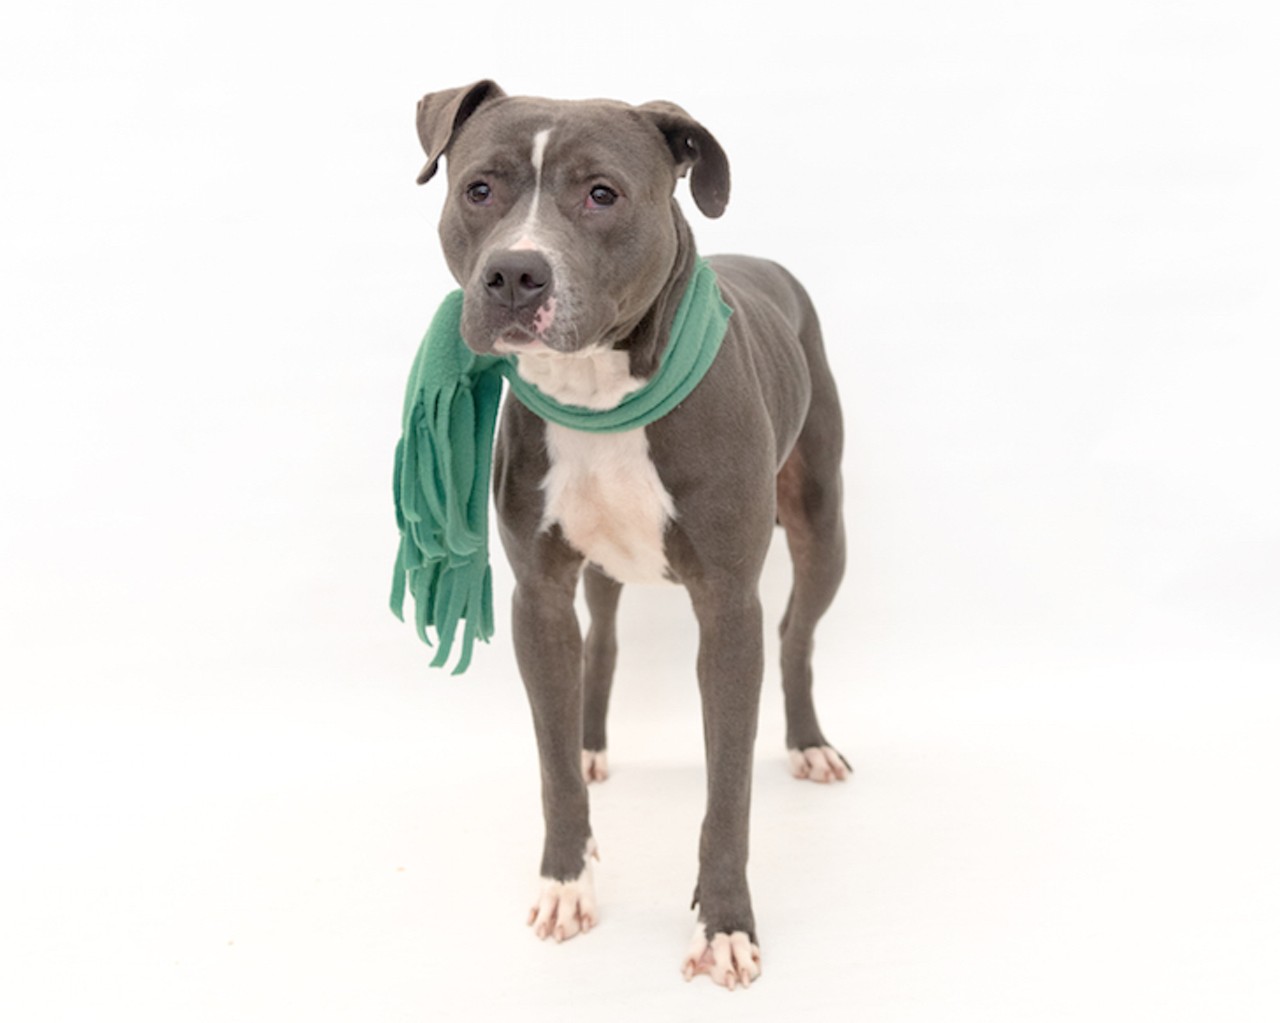 17 adoptable pups available right now at Orange County Animal Services